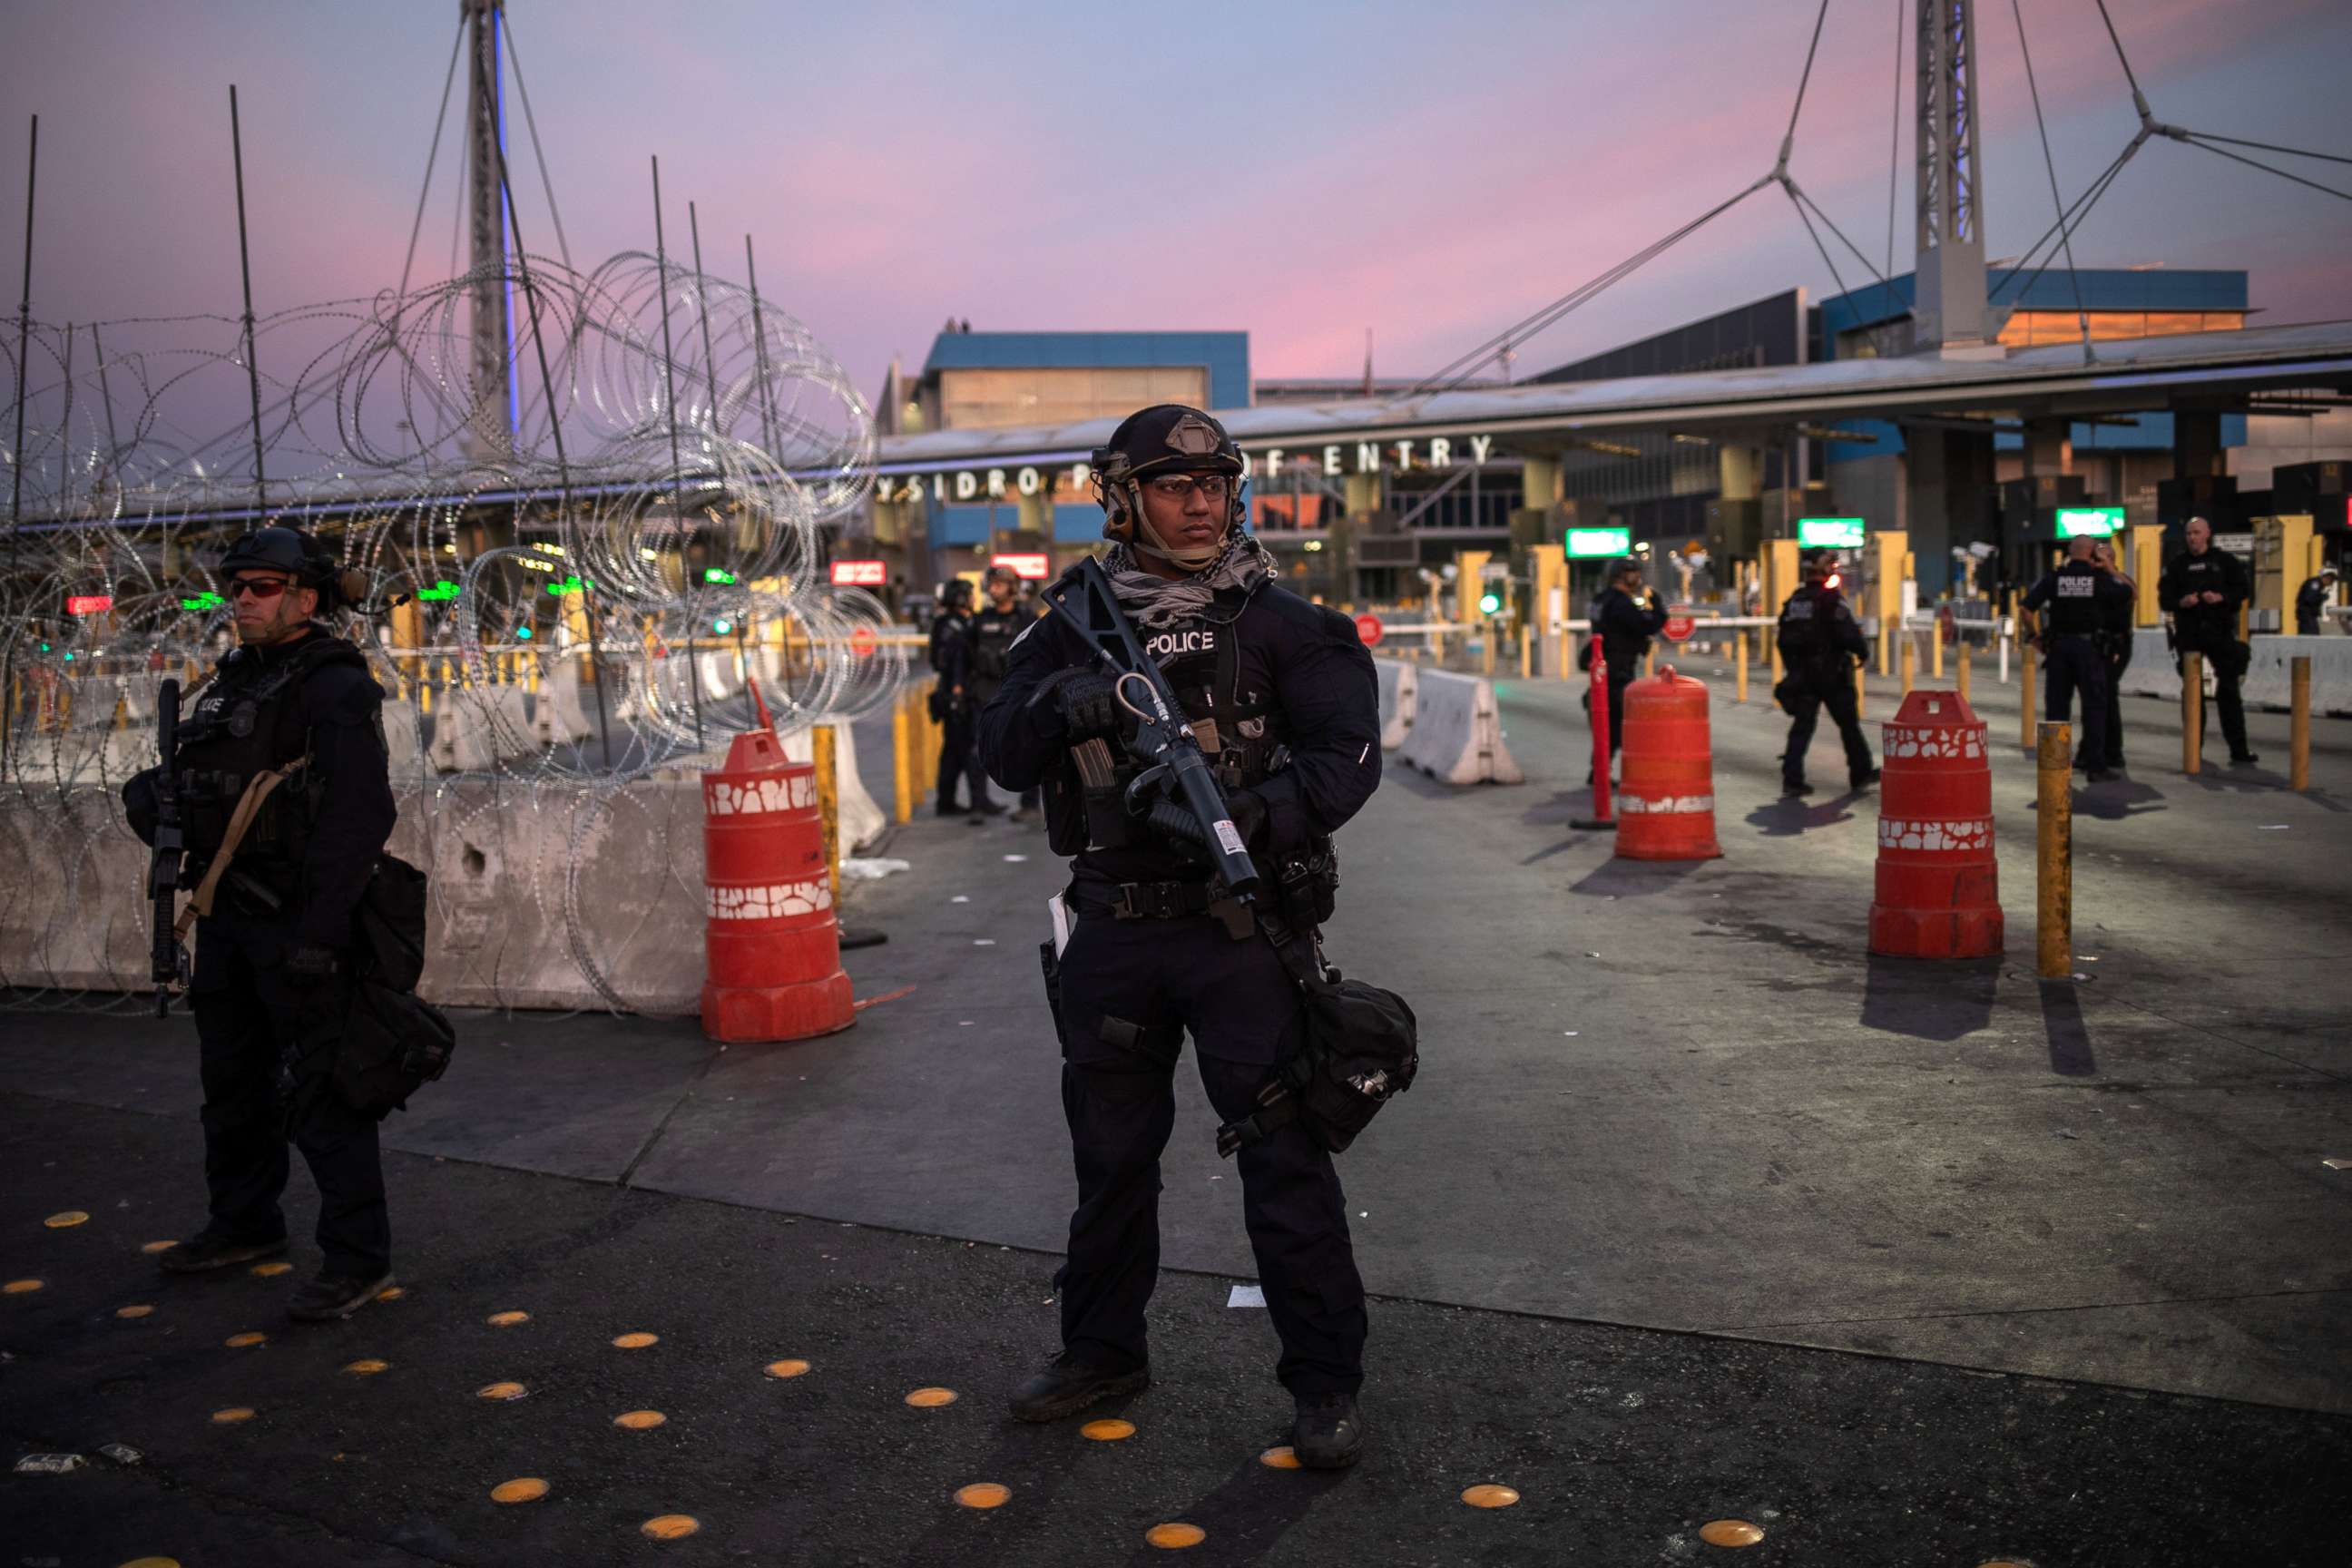 PHOTO: U.S. Customs and Border Protection Special Response Team officers stand guard at the San Ysidro Port of Entry after the land border crossing was temporarily closed to traffic from Tijuana, Mexico, Nov. 19, 2018.